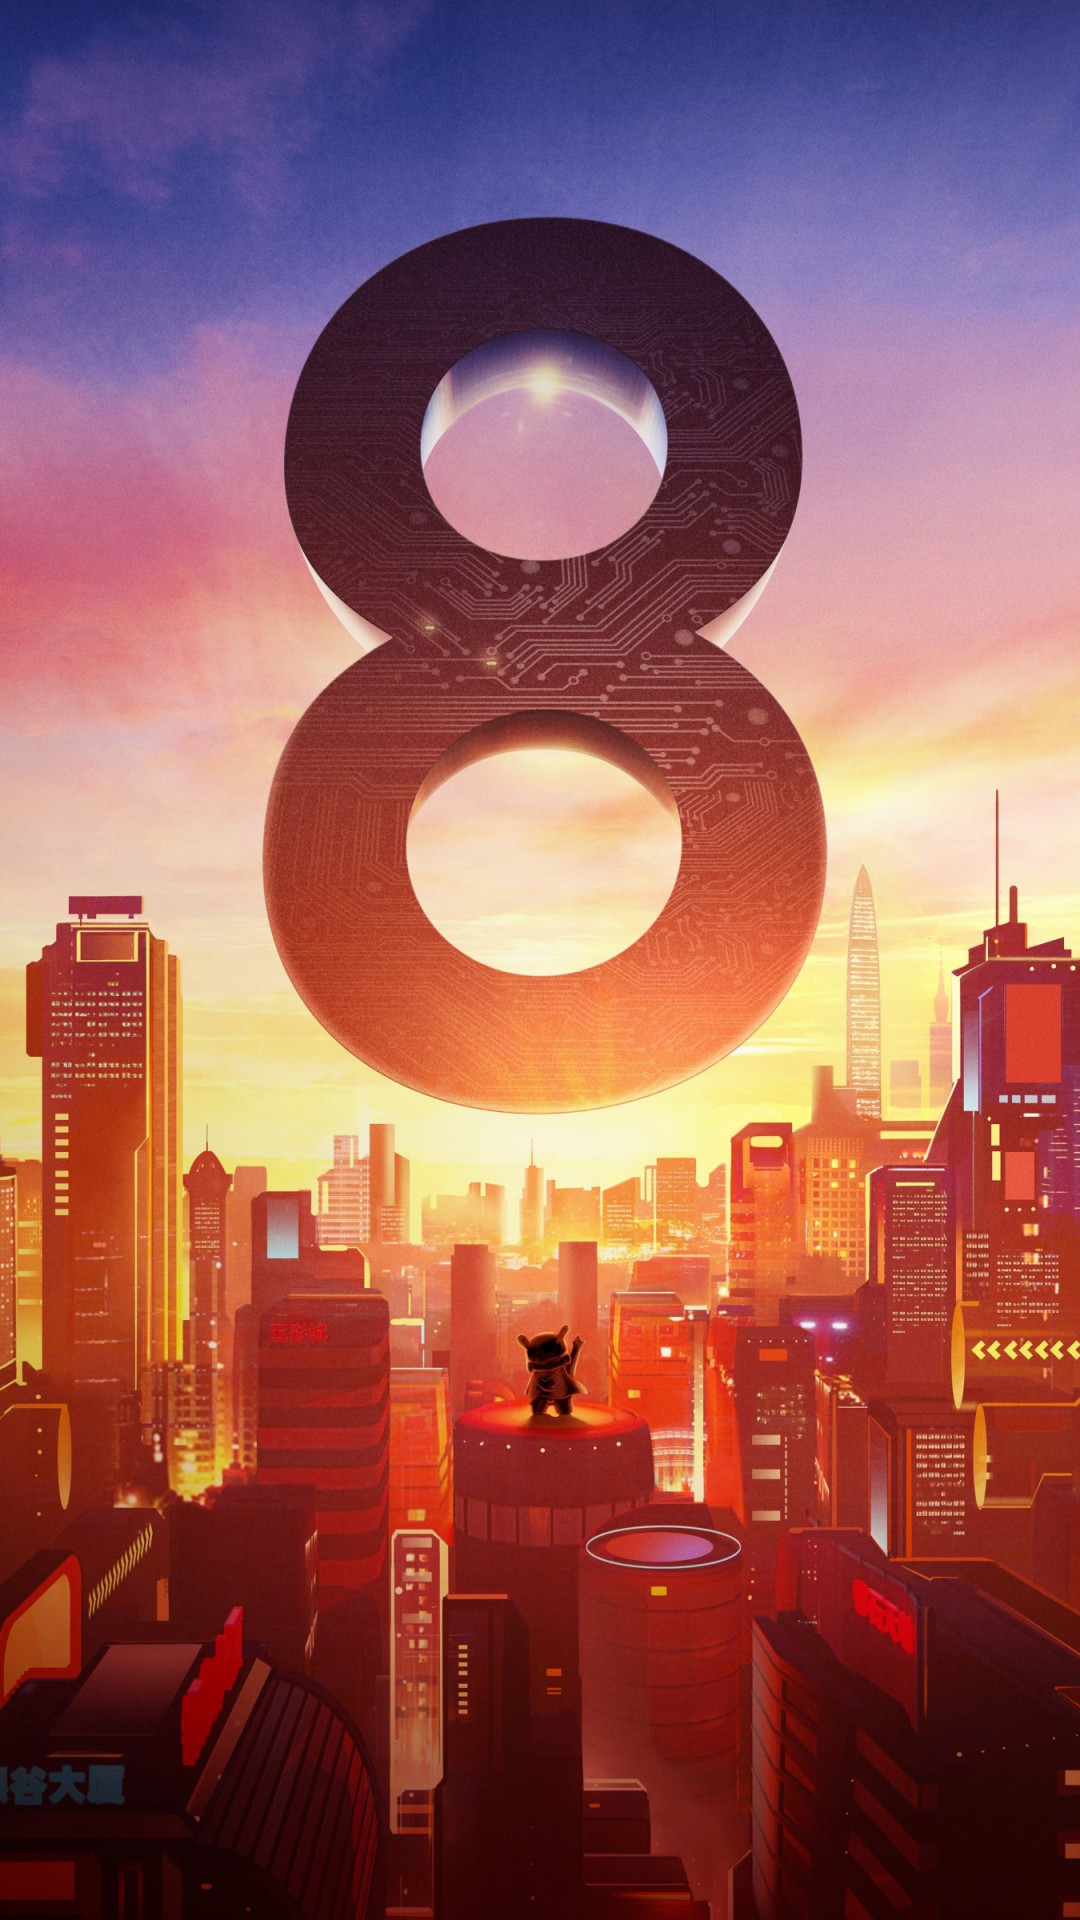 Xiaomi Mi 8. Poster from the launch event wallpaper 1080x1920